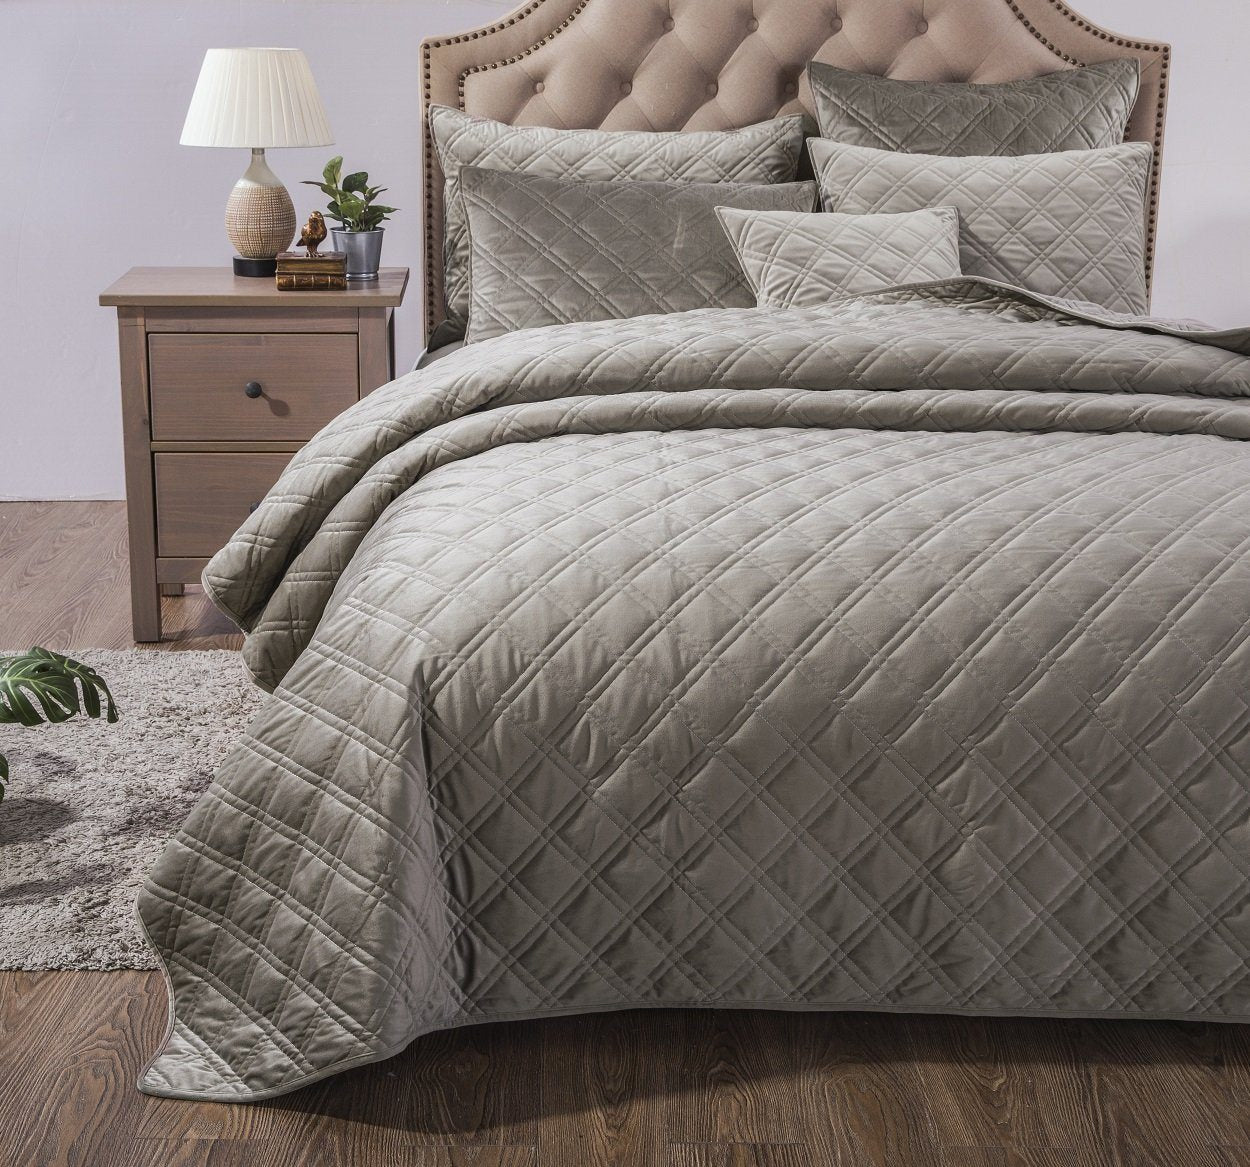 DaDa Bedding Velveteen Double Sided Quilted Coverlet Bedspread Set, Taupe Grey (JHW831)